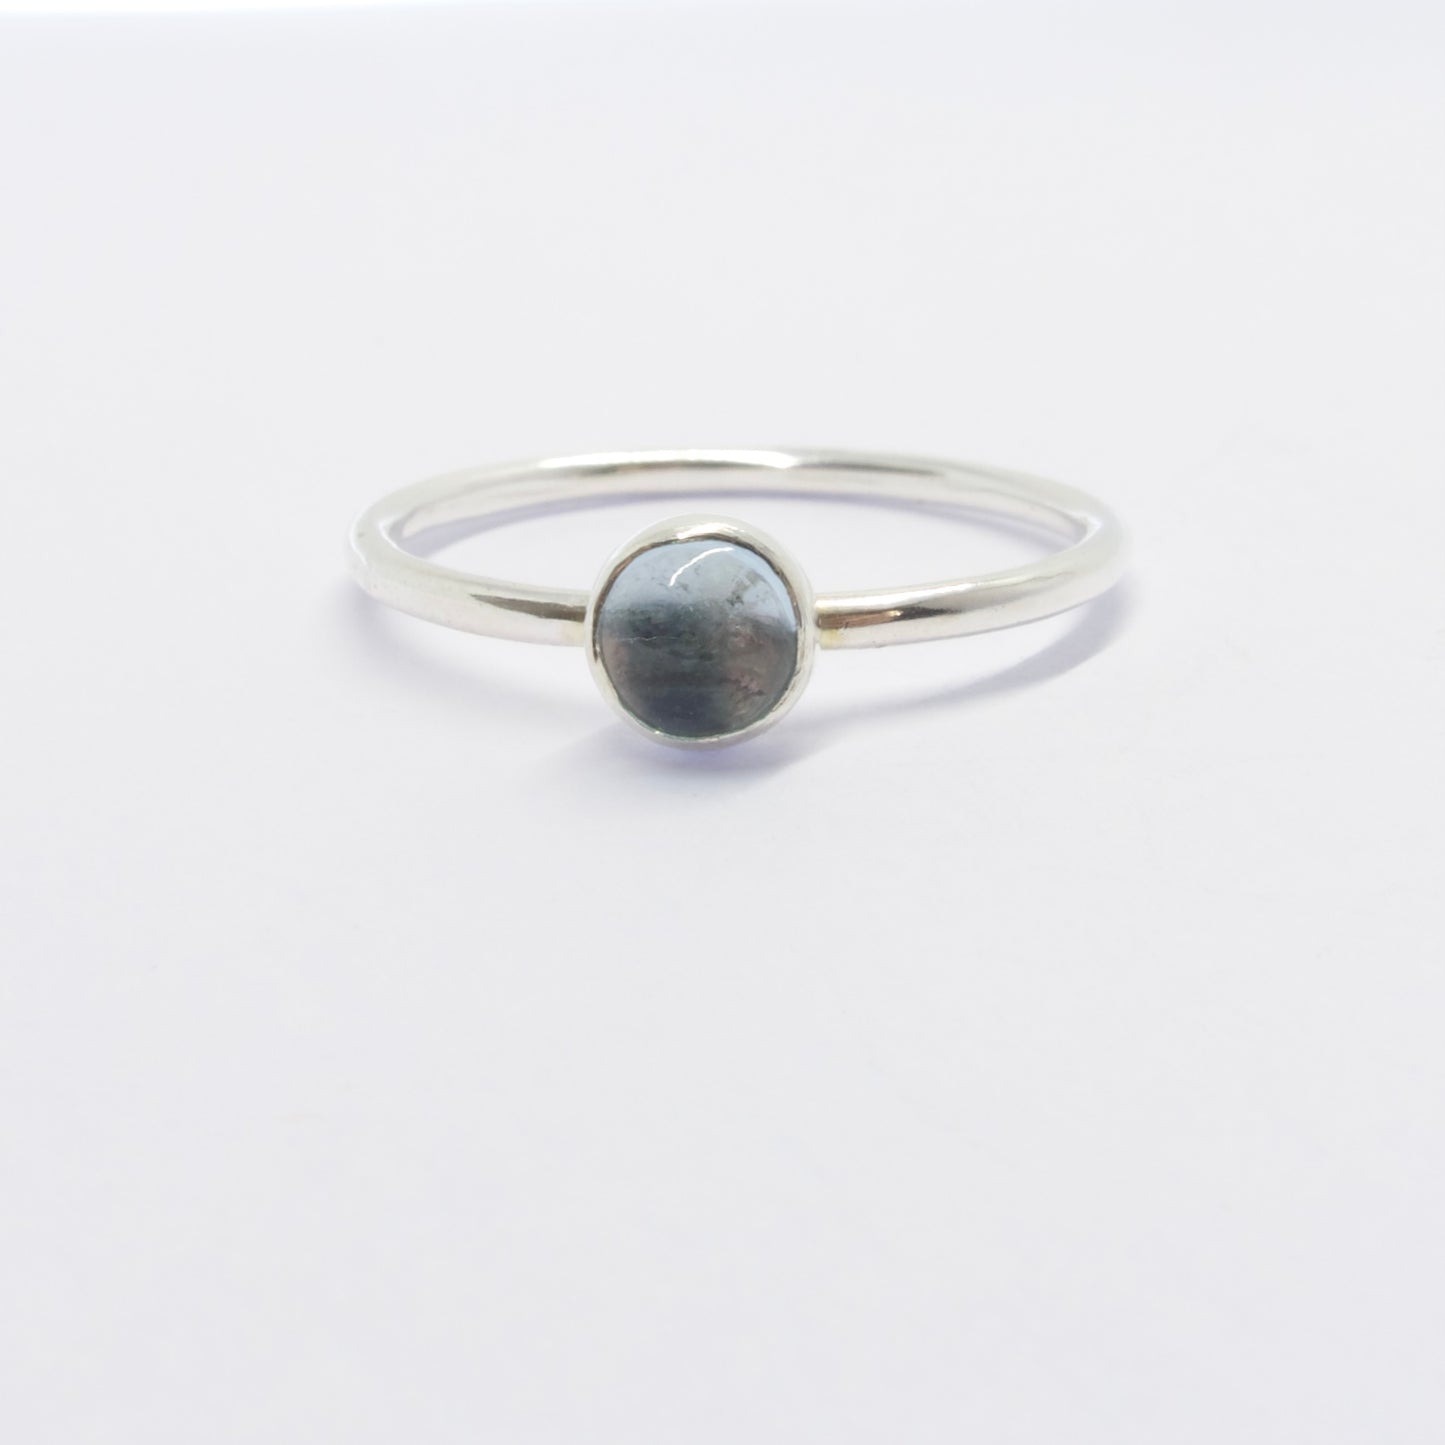 'Happiness' Topaz Stacking Ring